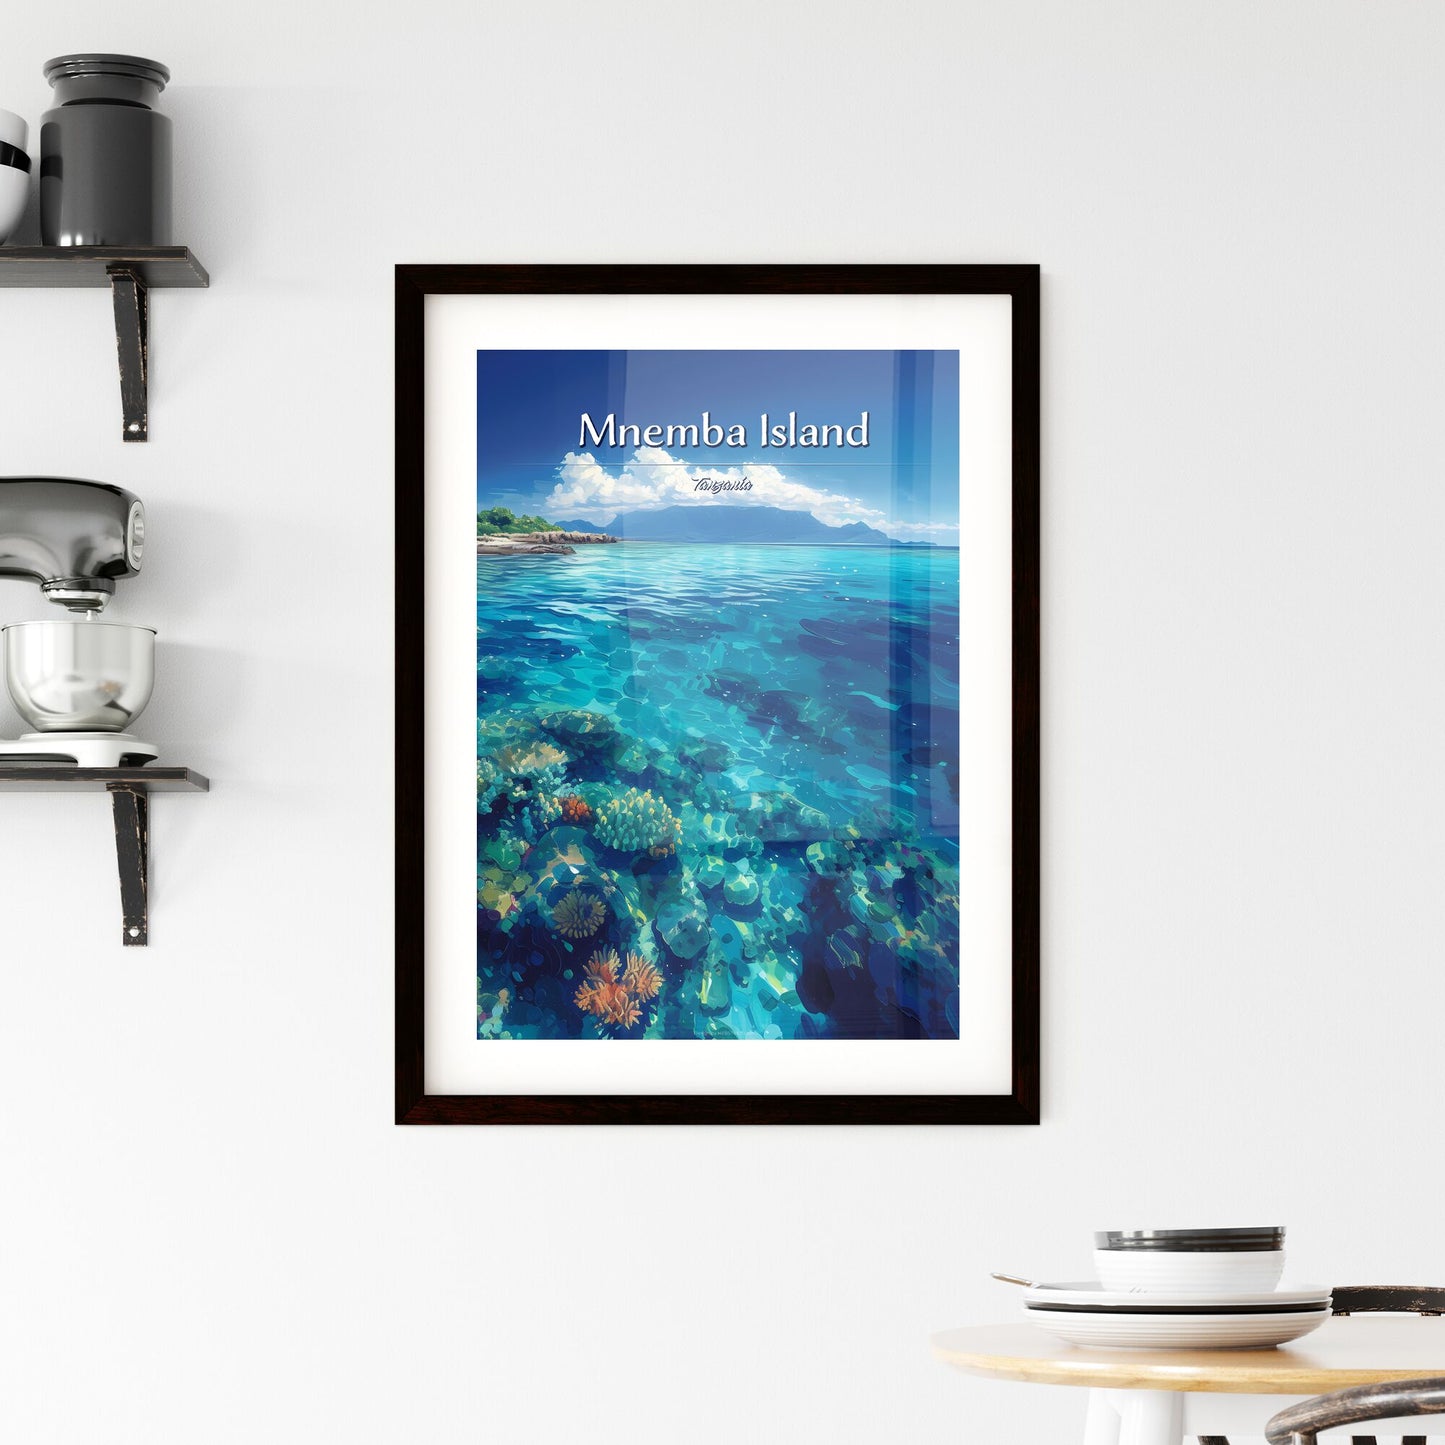 Mnemba Island, Tanzania - Art print of a coral reef in the water Default Title